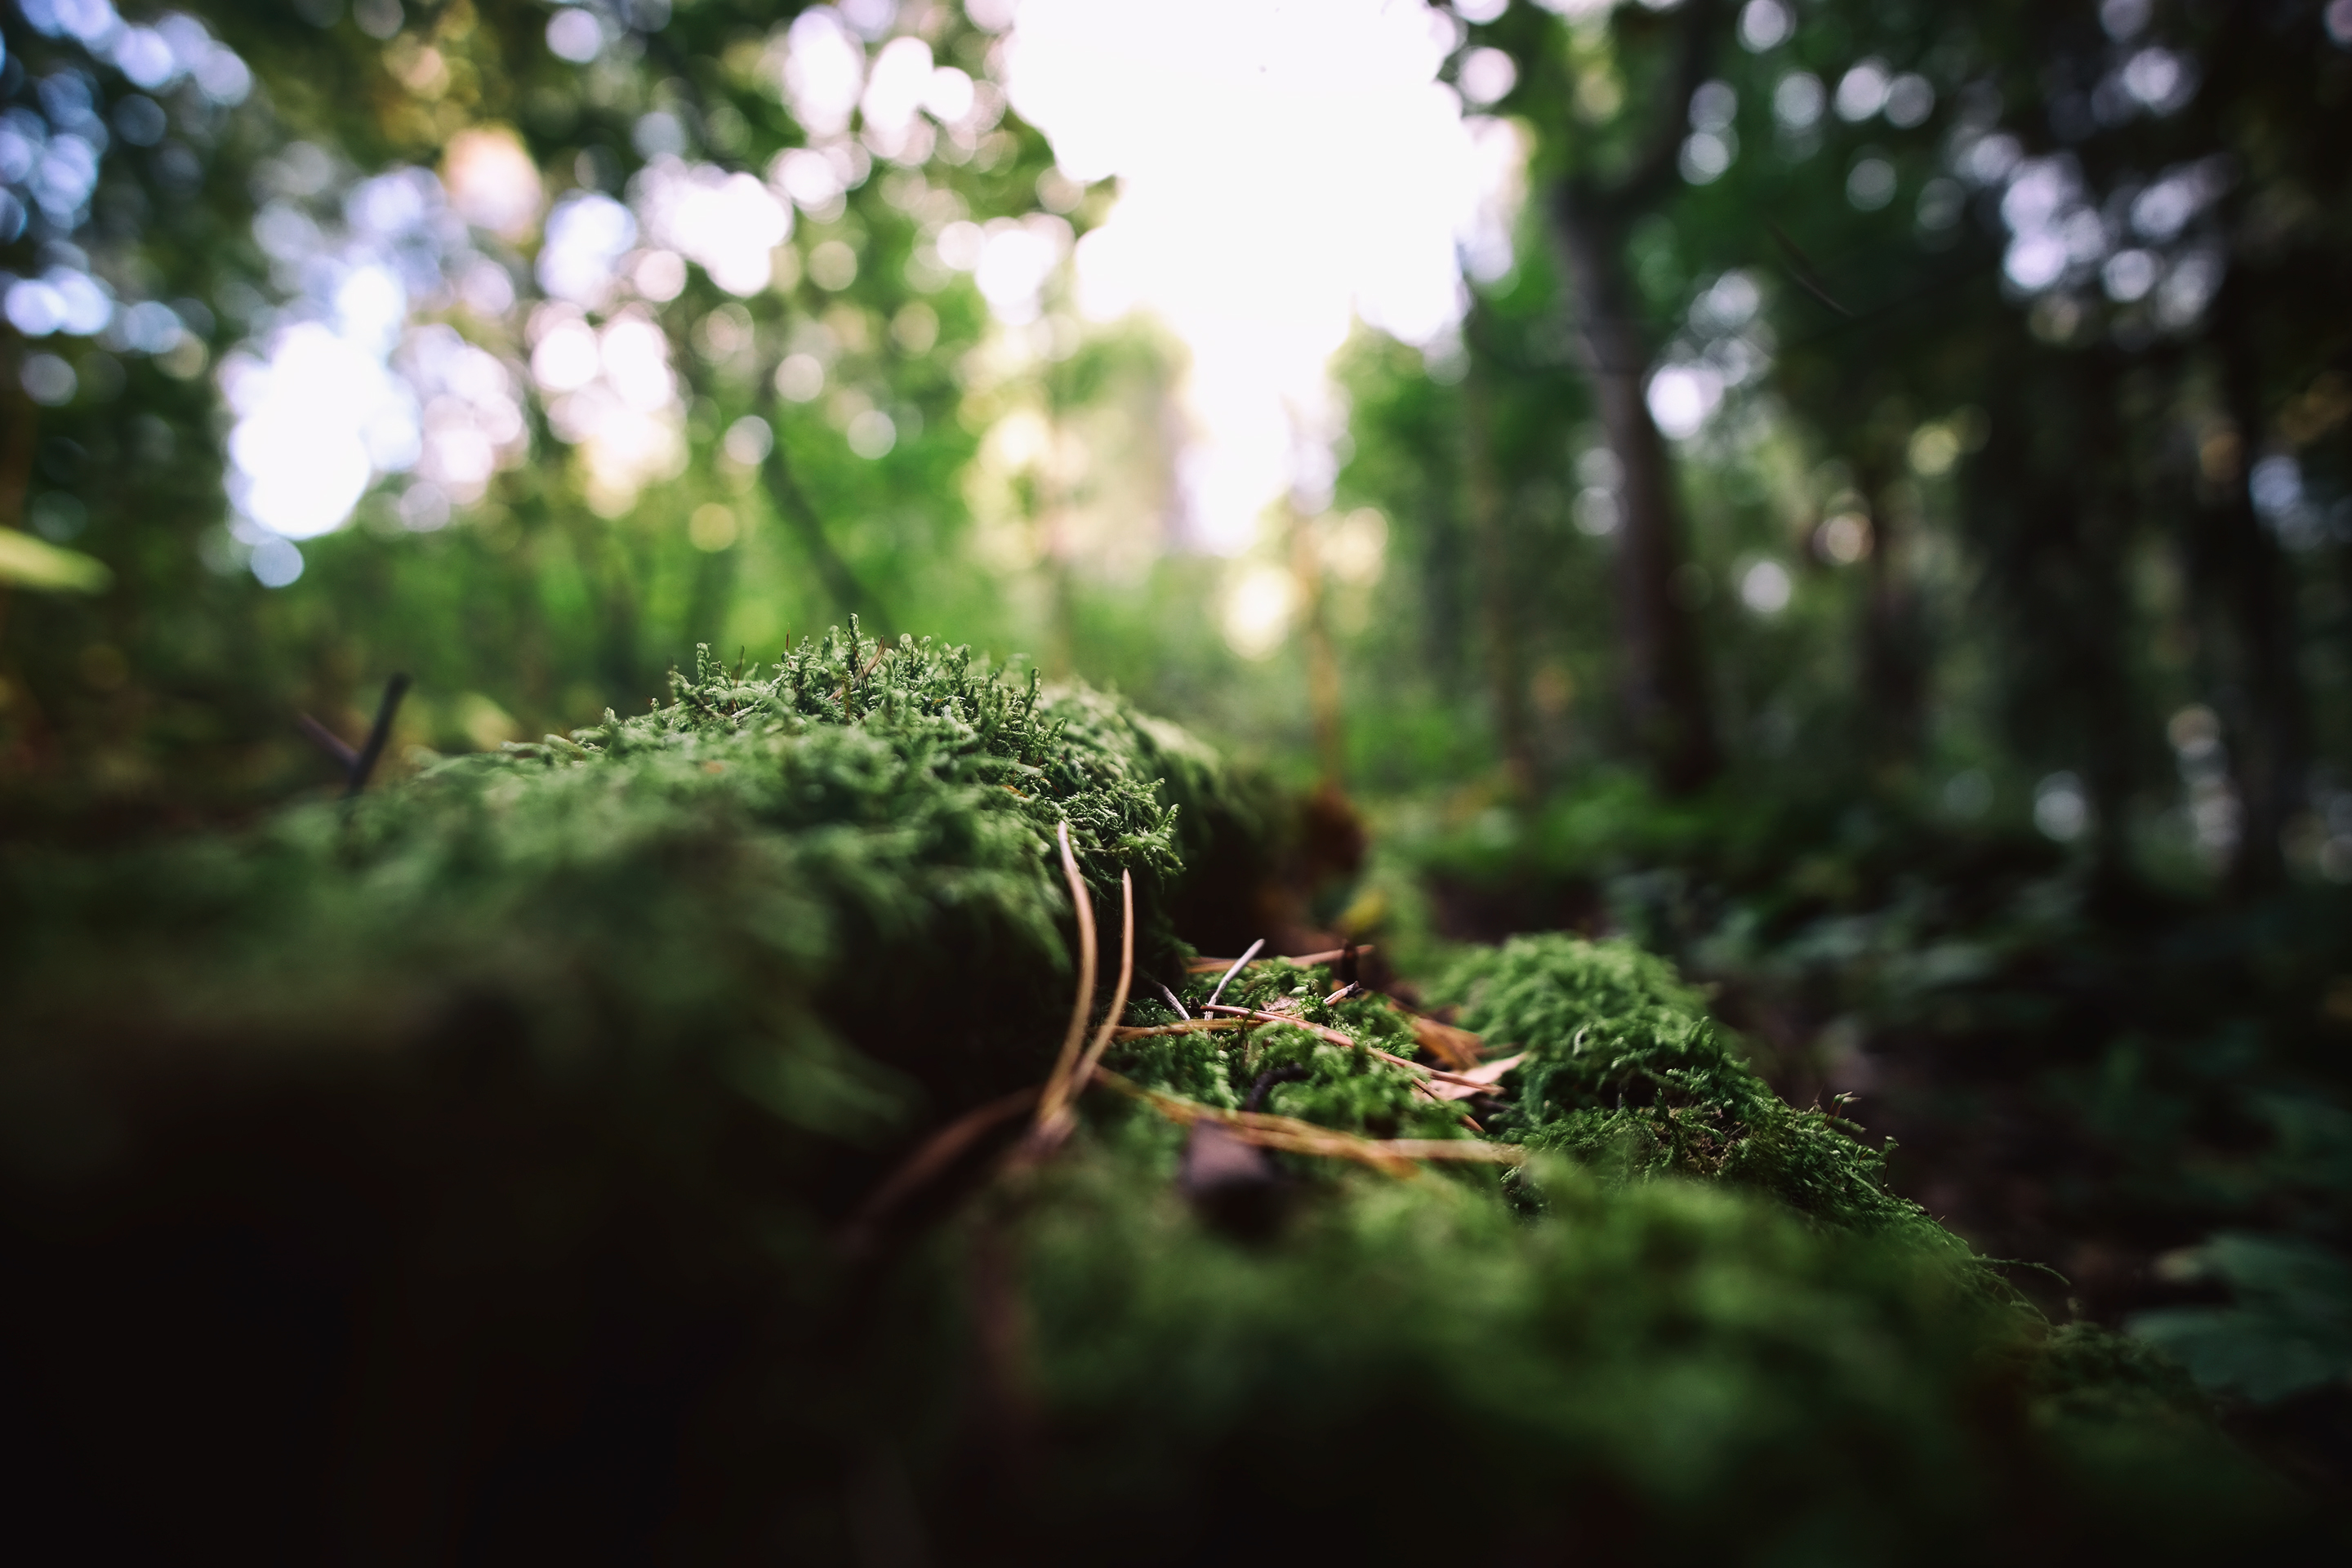 General 2880x1920 nature photography plants roots macro moss depth of field